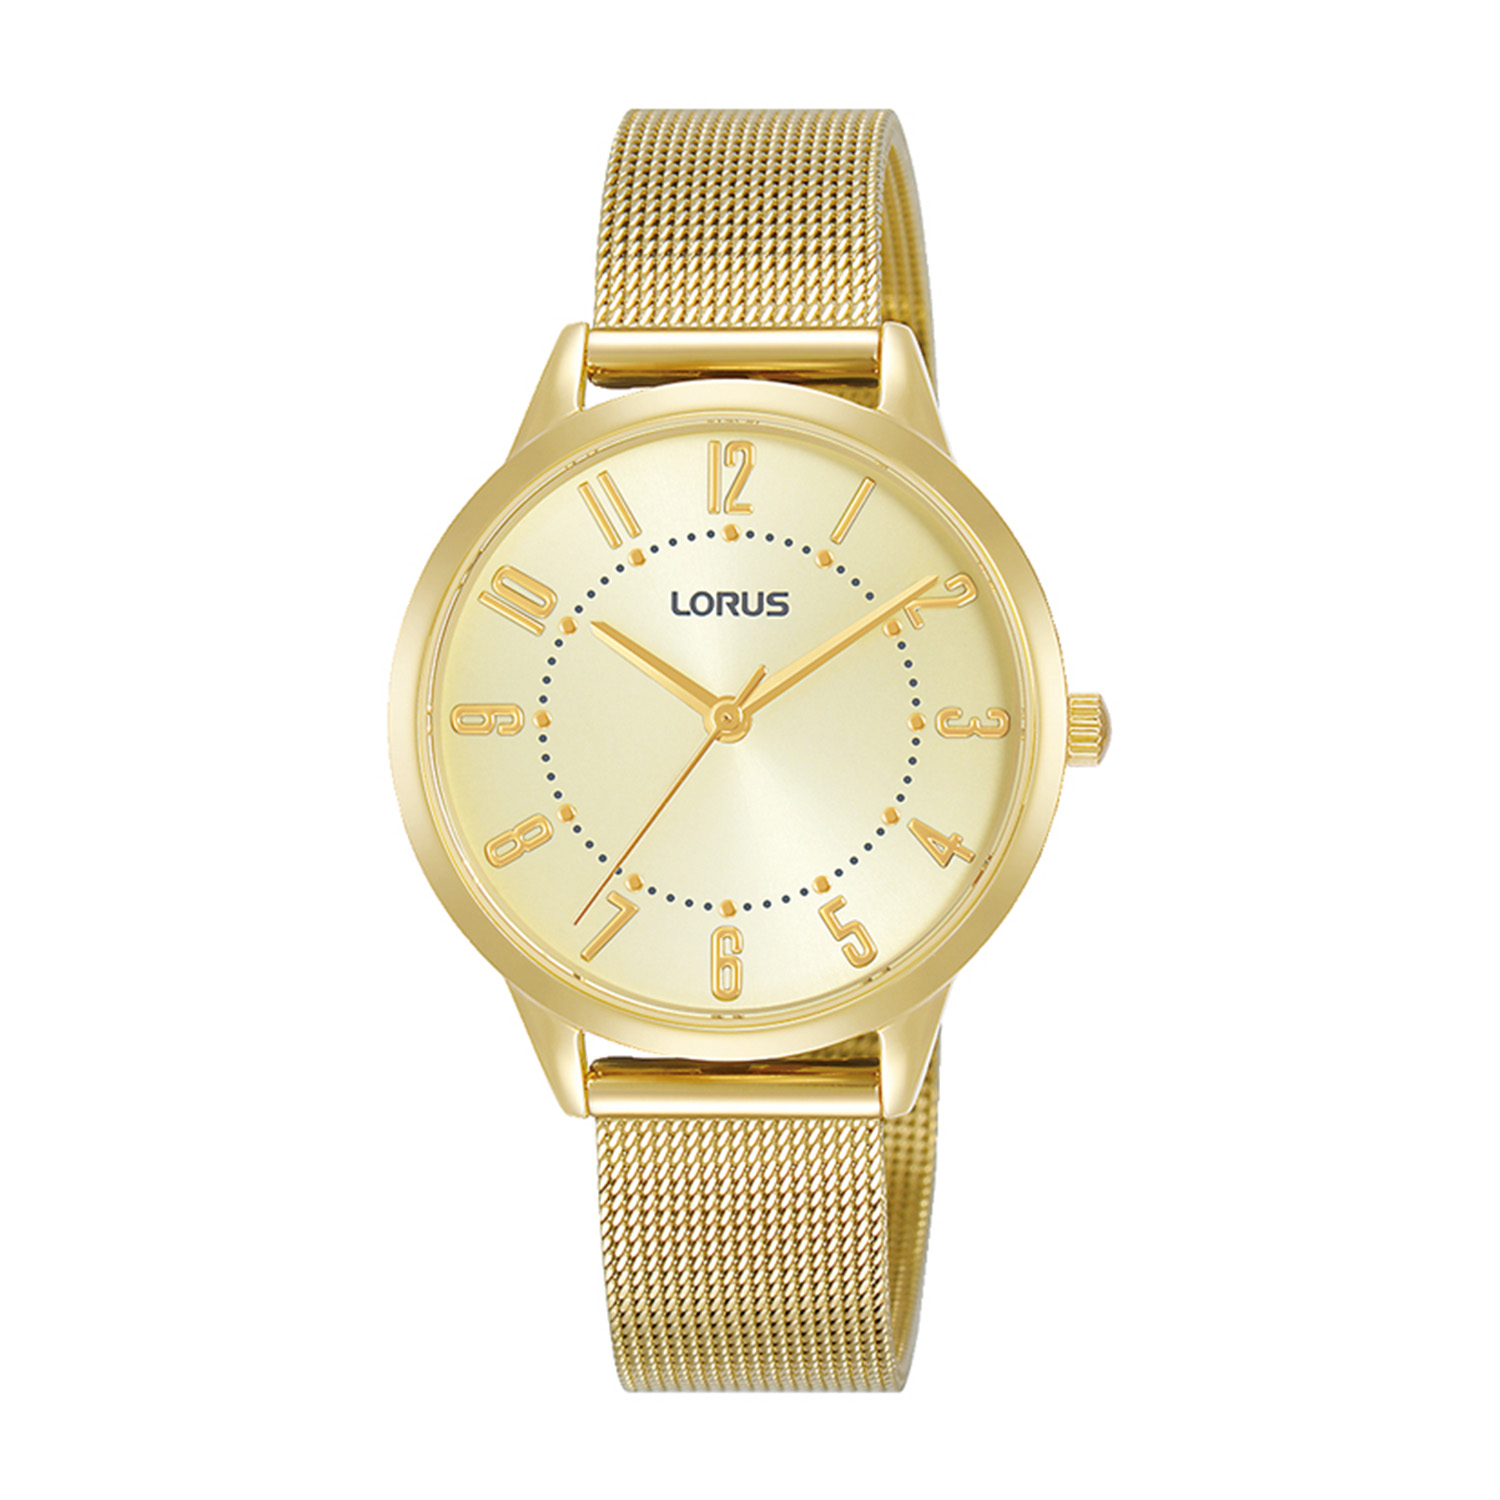 Womens watch LORUS made of gold stainless steel with gold dial and bracelet.